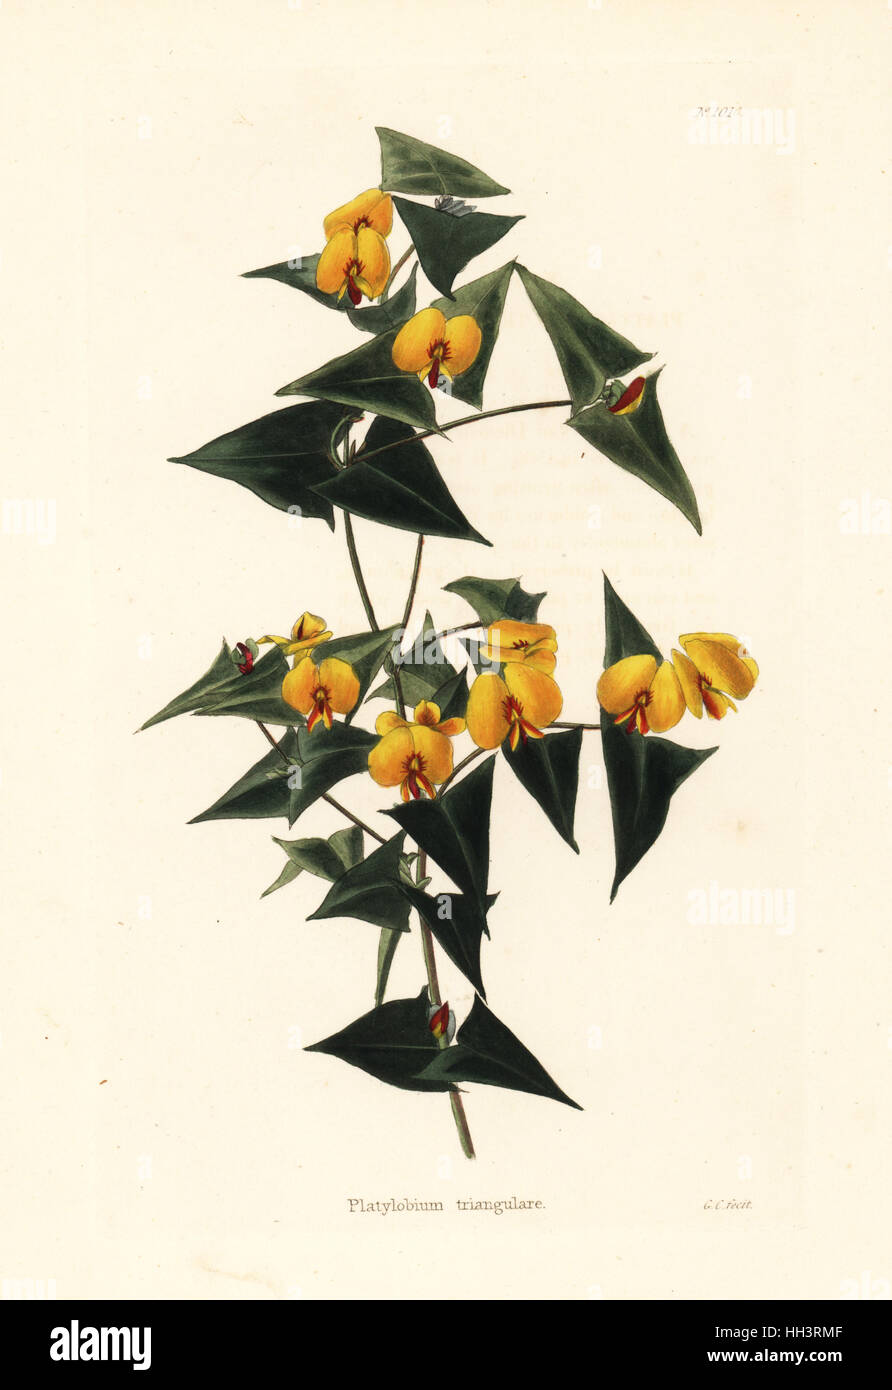 Ivy flat-pea, Platylobium triangulare. Handcoloured copperplate engraving by George Cooke from Conrad Loddiges' Botanical Cabinet, Hackney, 1825. Stock Photo